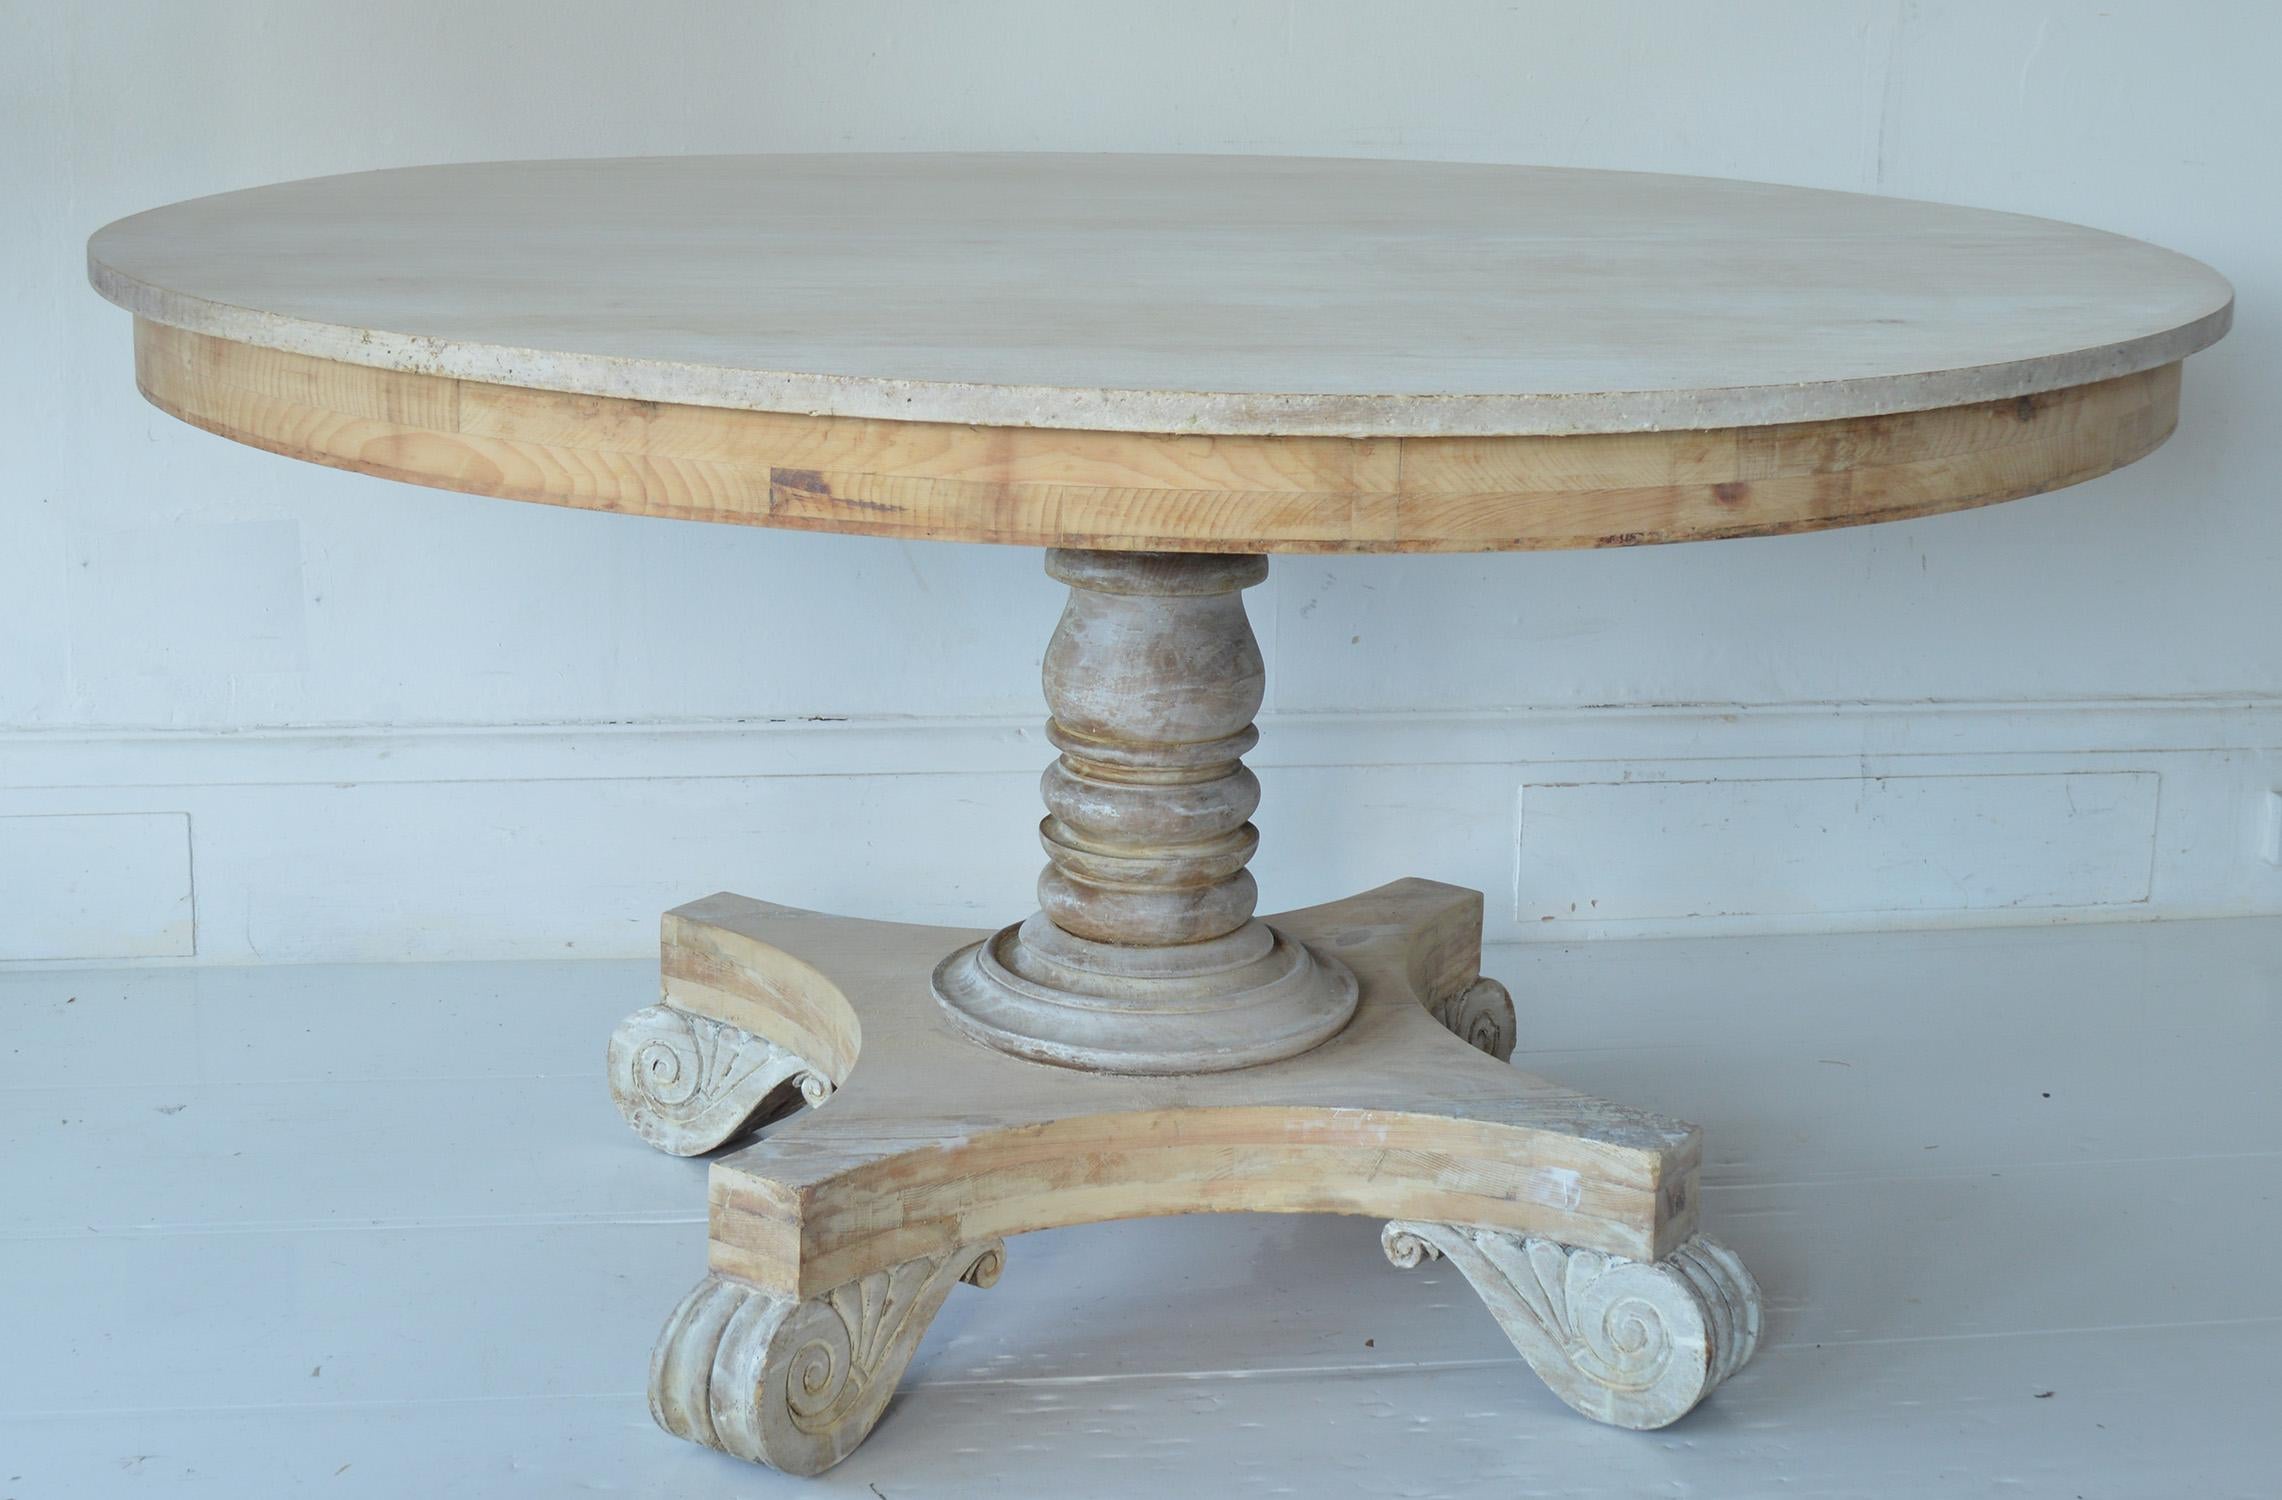 Fabulous large round table. Made from bleached pine and Honduras mahogany.

Original castors and hardware. The top does tip.

Great simple lines. I particularly like the carved anthemion details on the feet.

I have chosen not to lacquer or